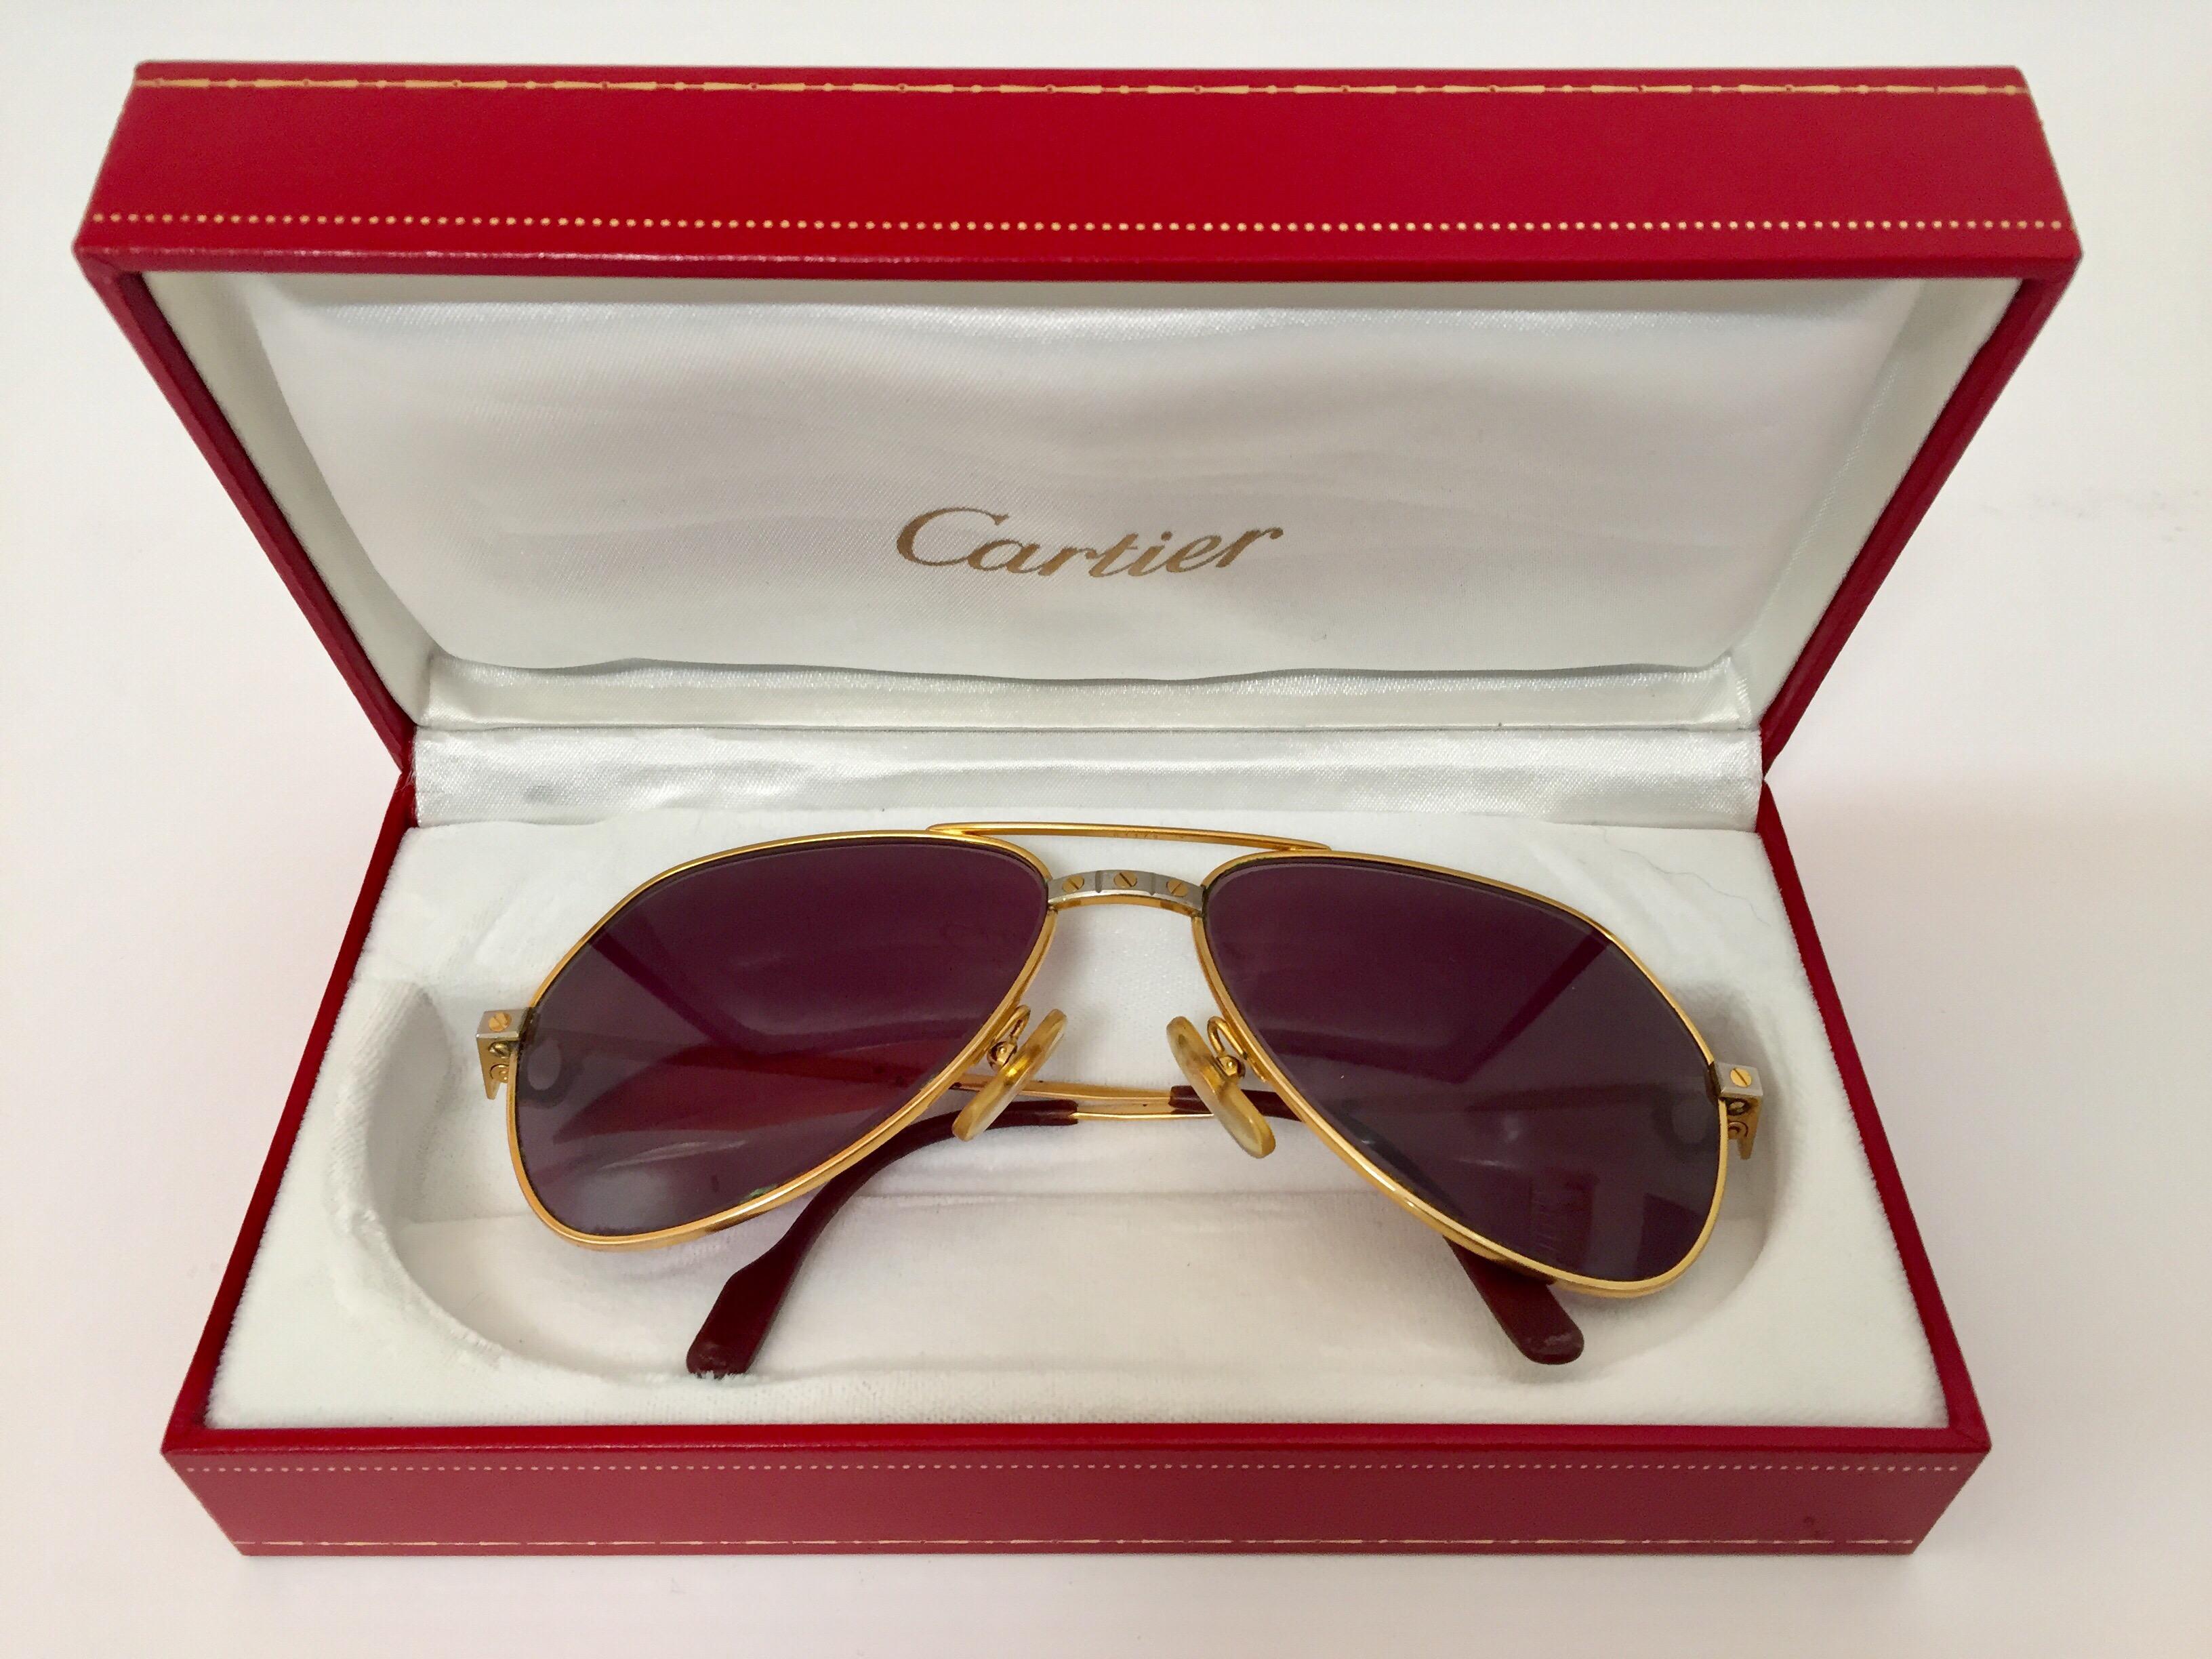 Vintage Cartier Occhiali 1980s Louis Vendome.
Vintage Cartier Vendome glasses are highly desired by all connoisseurs of fine eyewear in general and Cartier in particular.
Features gold larger frame, signature temple adornment, and iconic logo temple